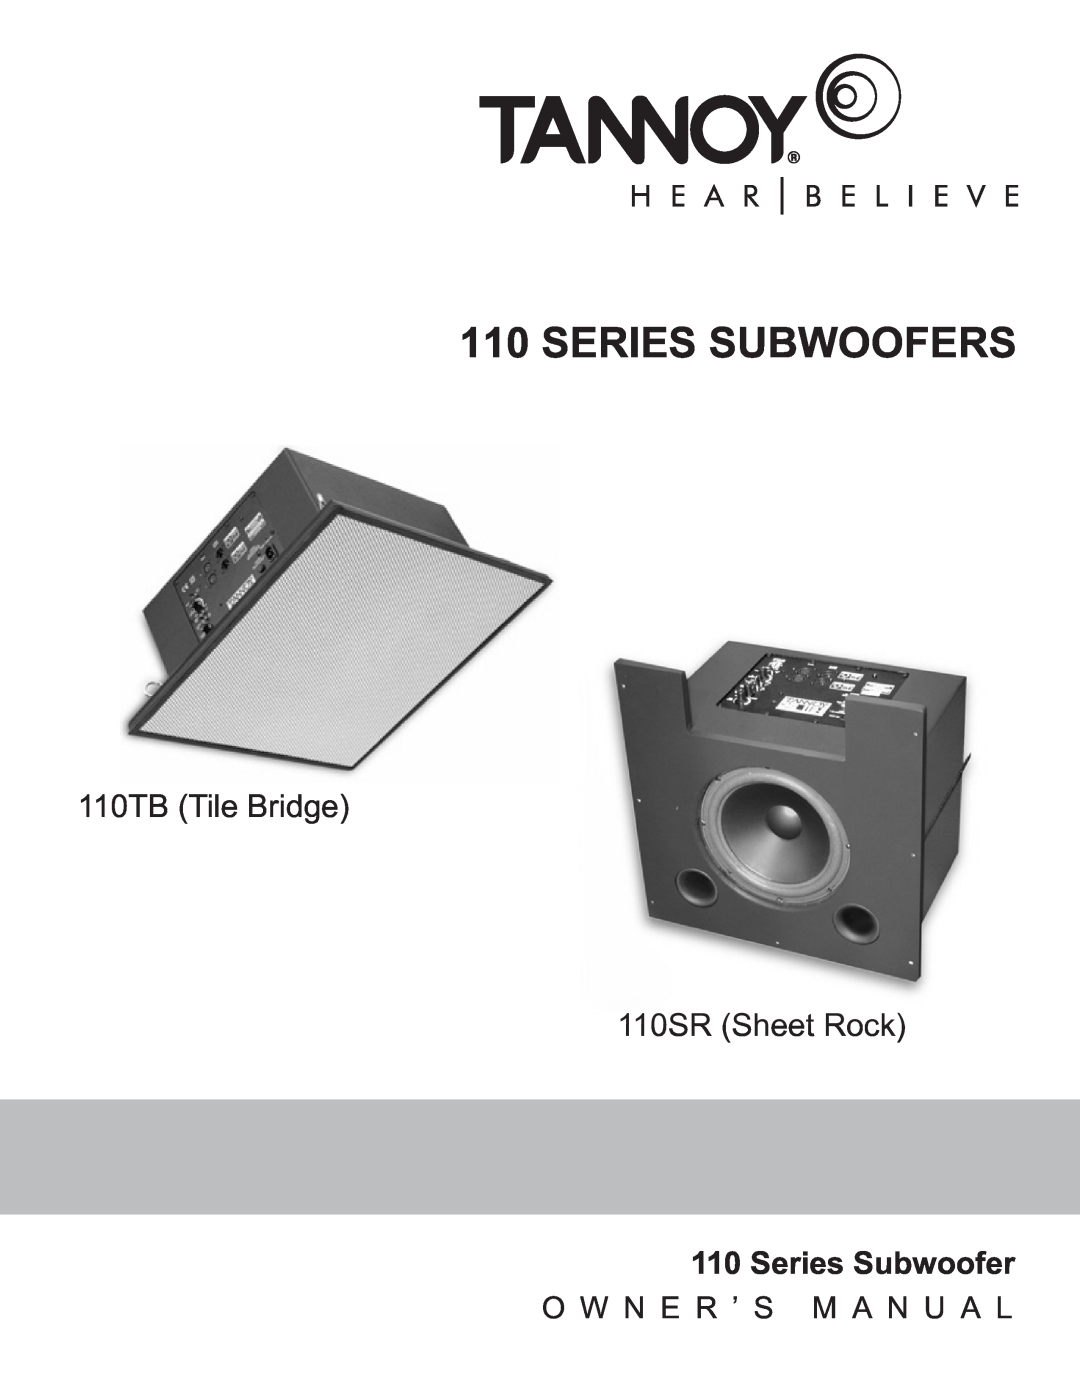 TOA Electronics owner manual Series Subwoofers, 110TB Tile Bridge 110SR Sheet Rock, O W N E R ’ S M A N U A L 